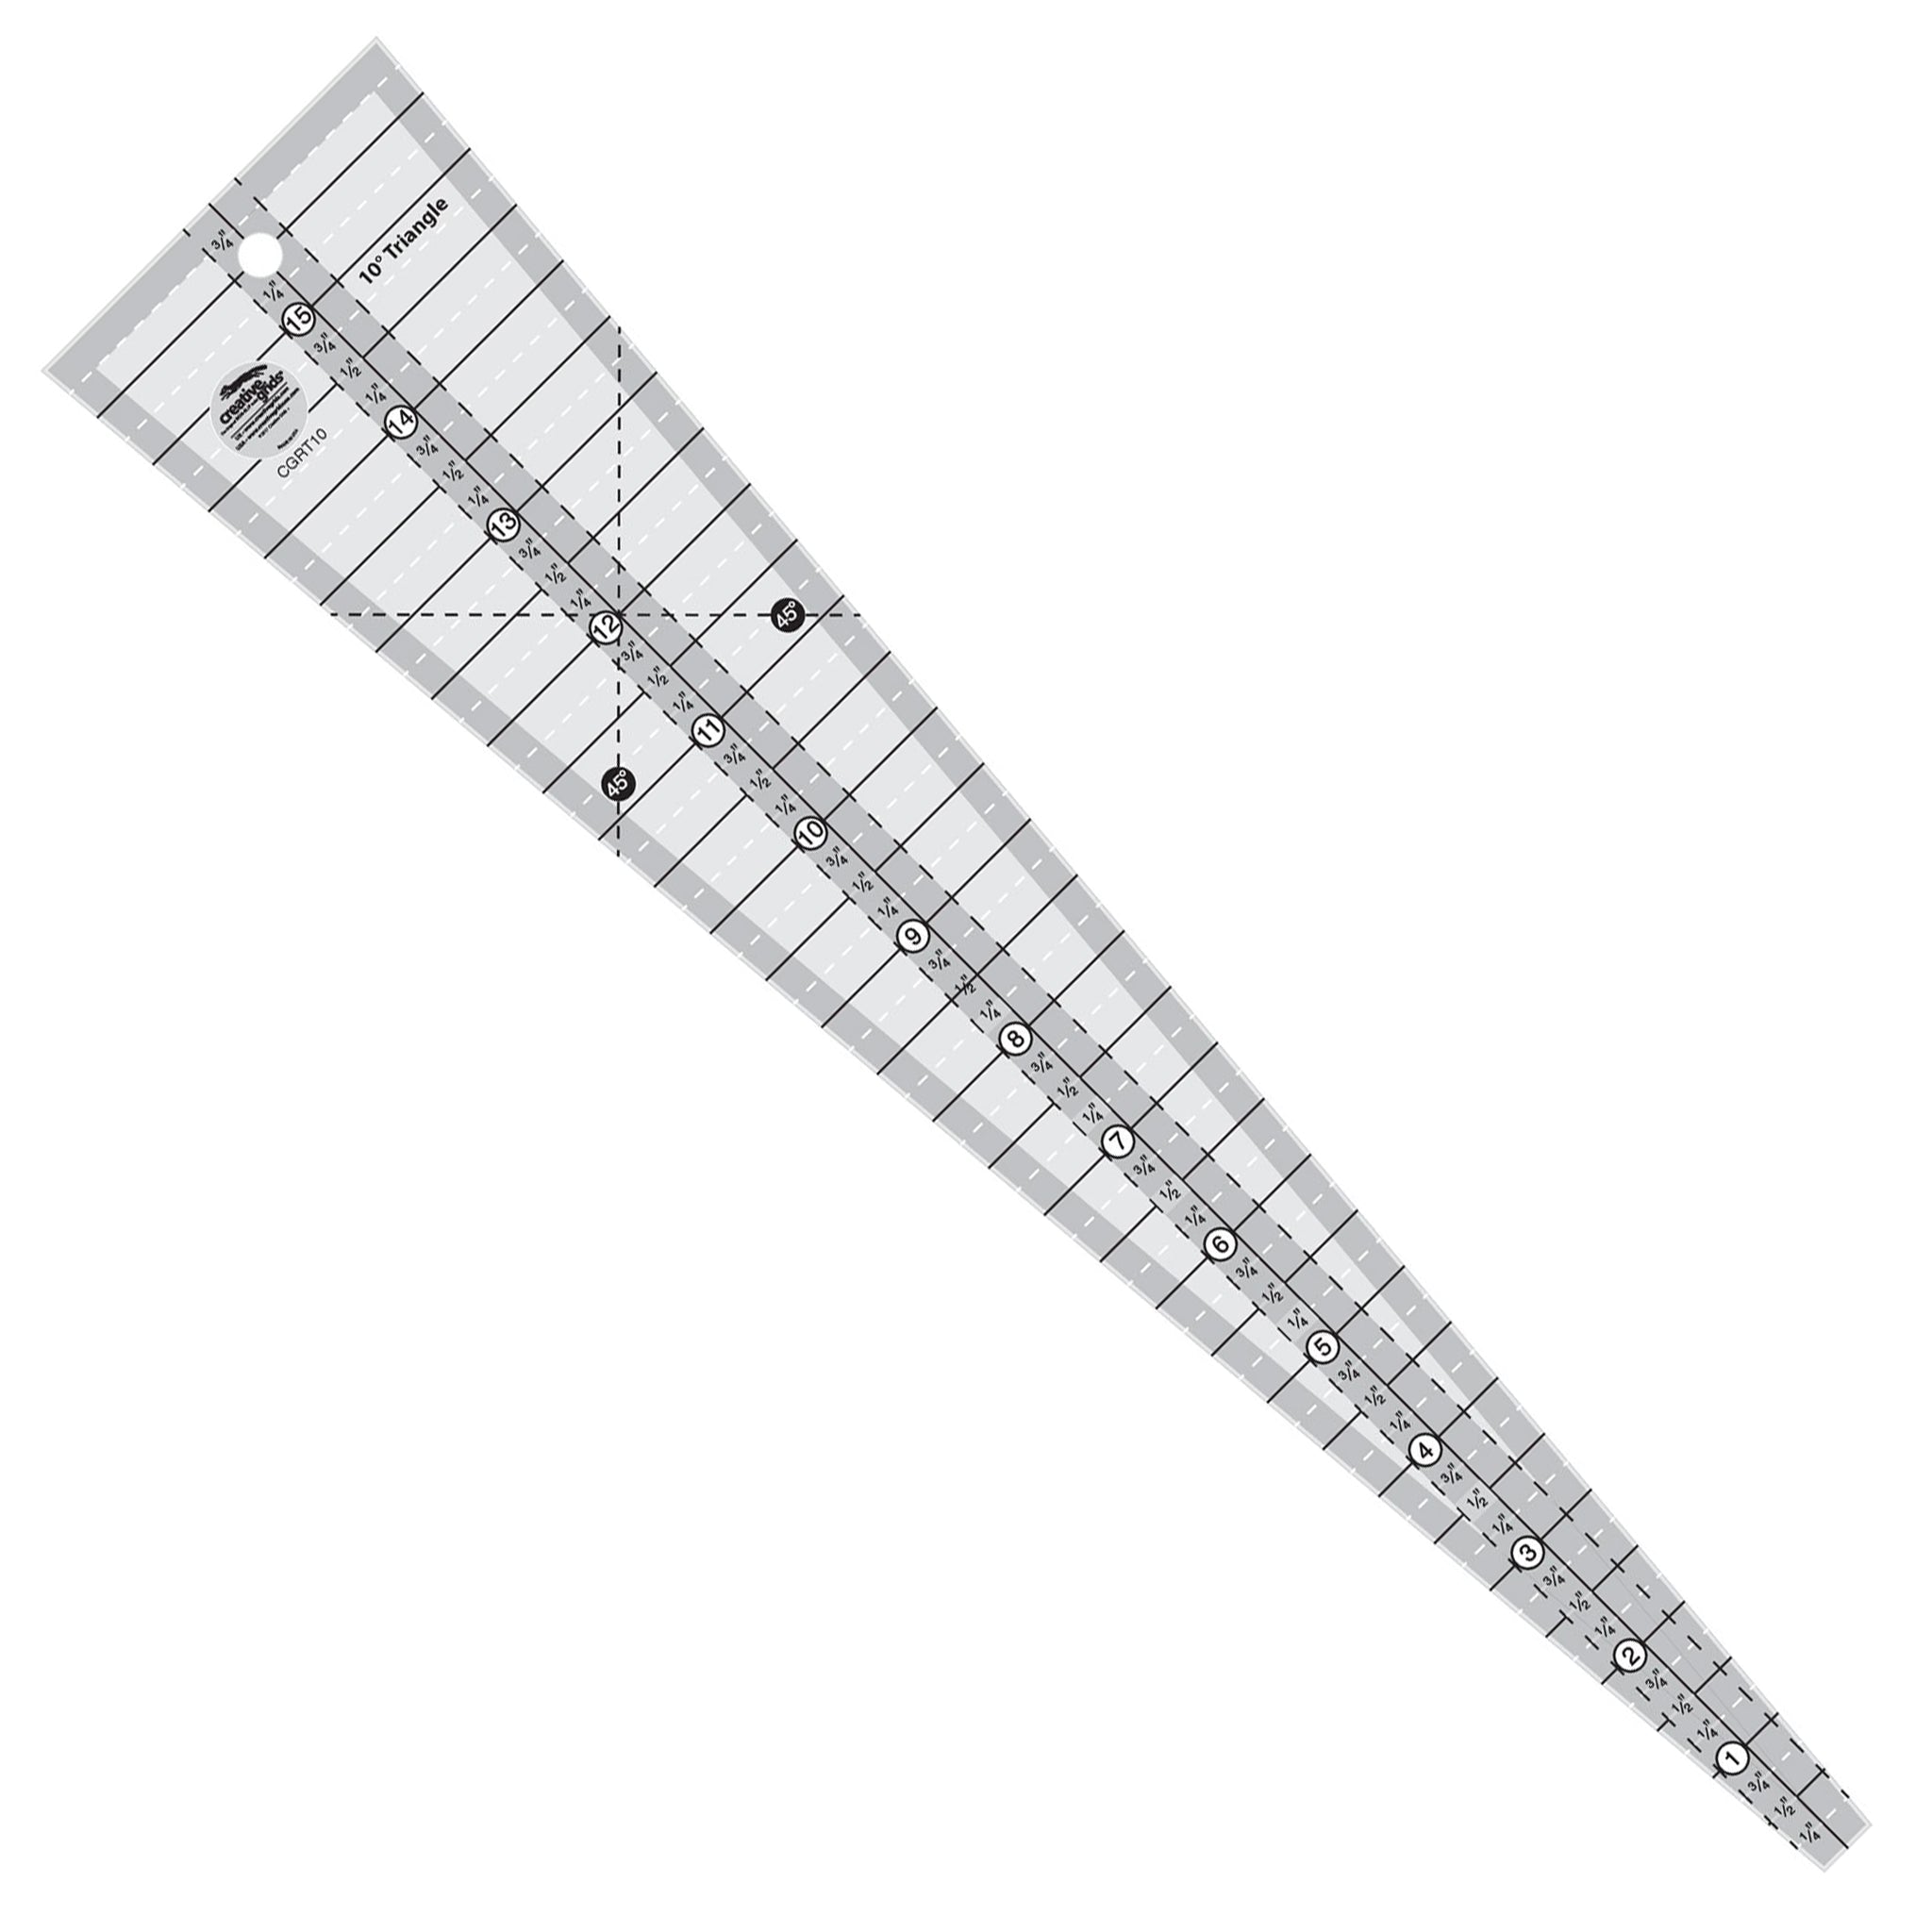 Creative Grids 10 Degree Triangle Quilt Ruler (CGRT10)